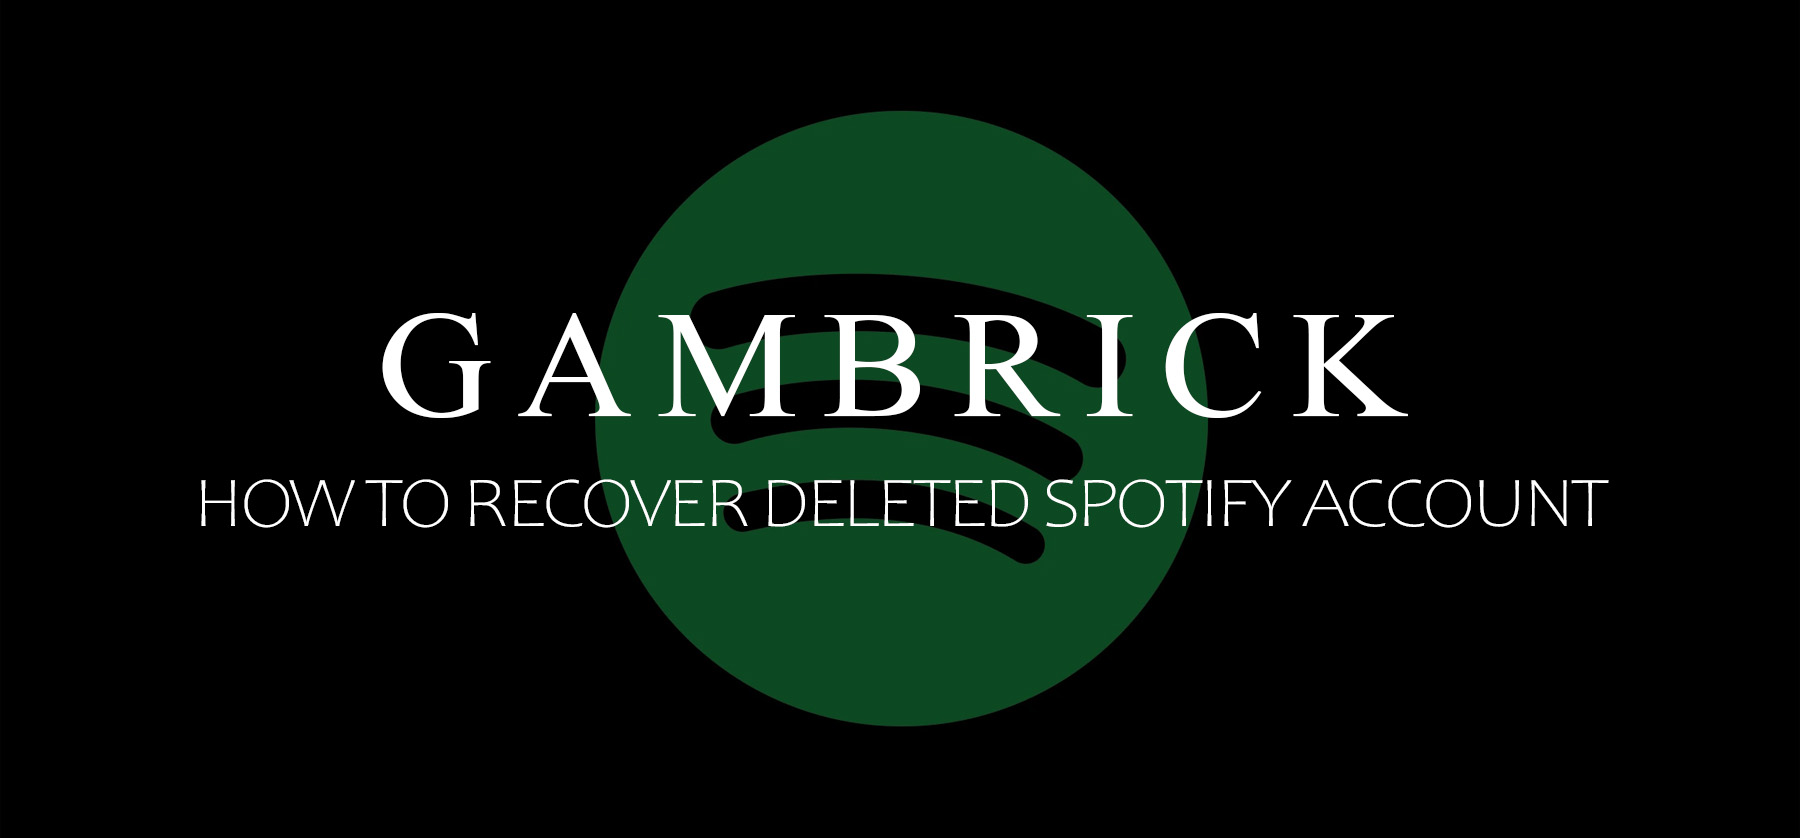 how to recover deleted Spotify account banner 1.0